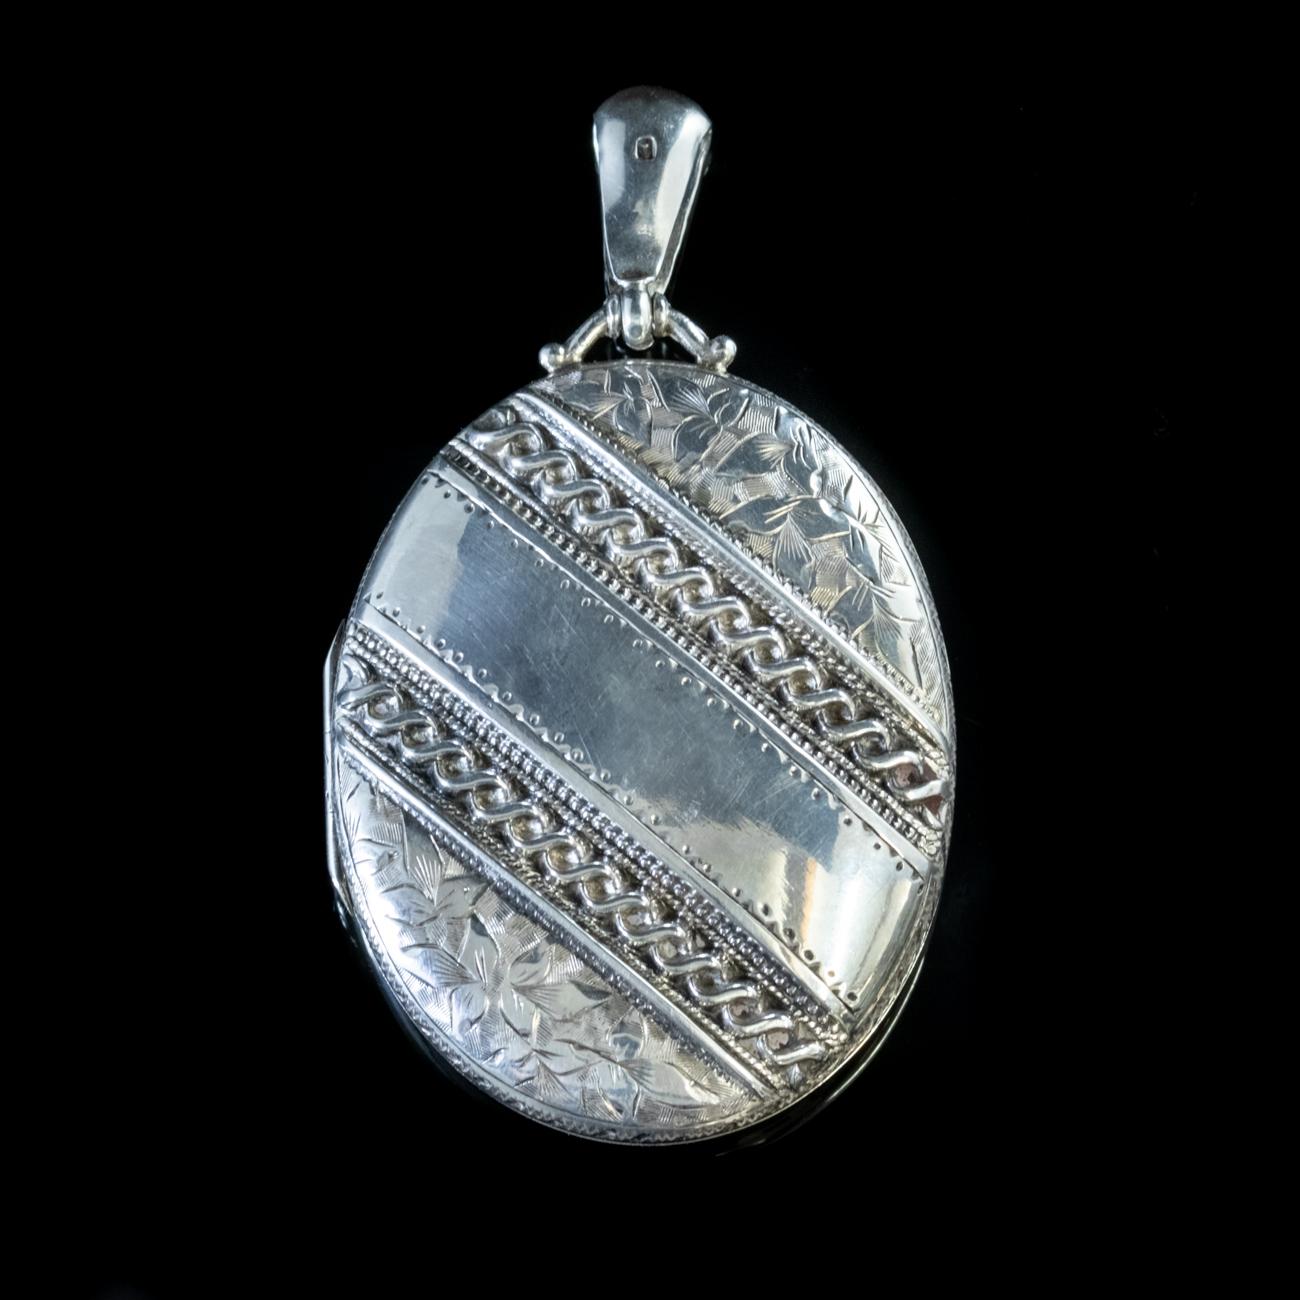 This stunning Antique Victorian Locket dated 1881 has been beautifully crafted in Sterling Silver and engraved with foliate motifs and Ivy.

The Ivy represents an unbreakable bond, such as friendship or marriage, as in the Victorian rhyme ‘Close